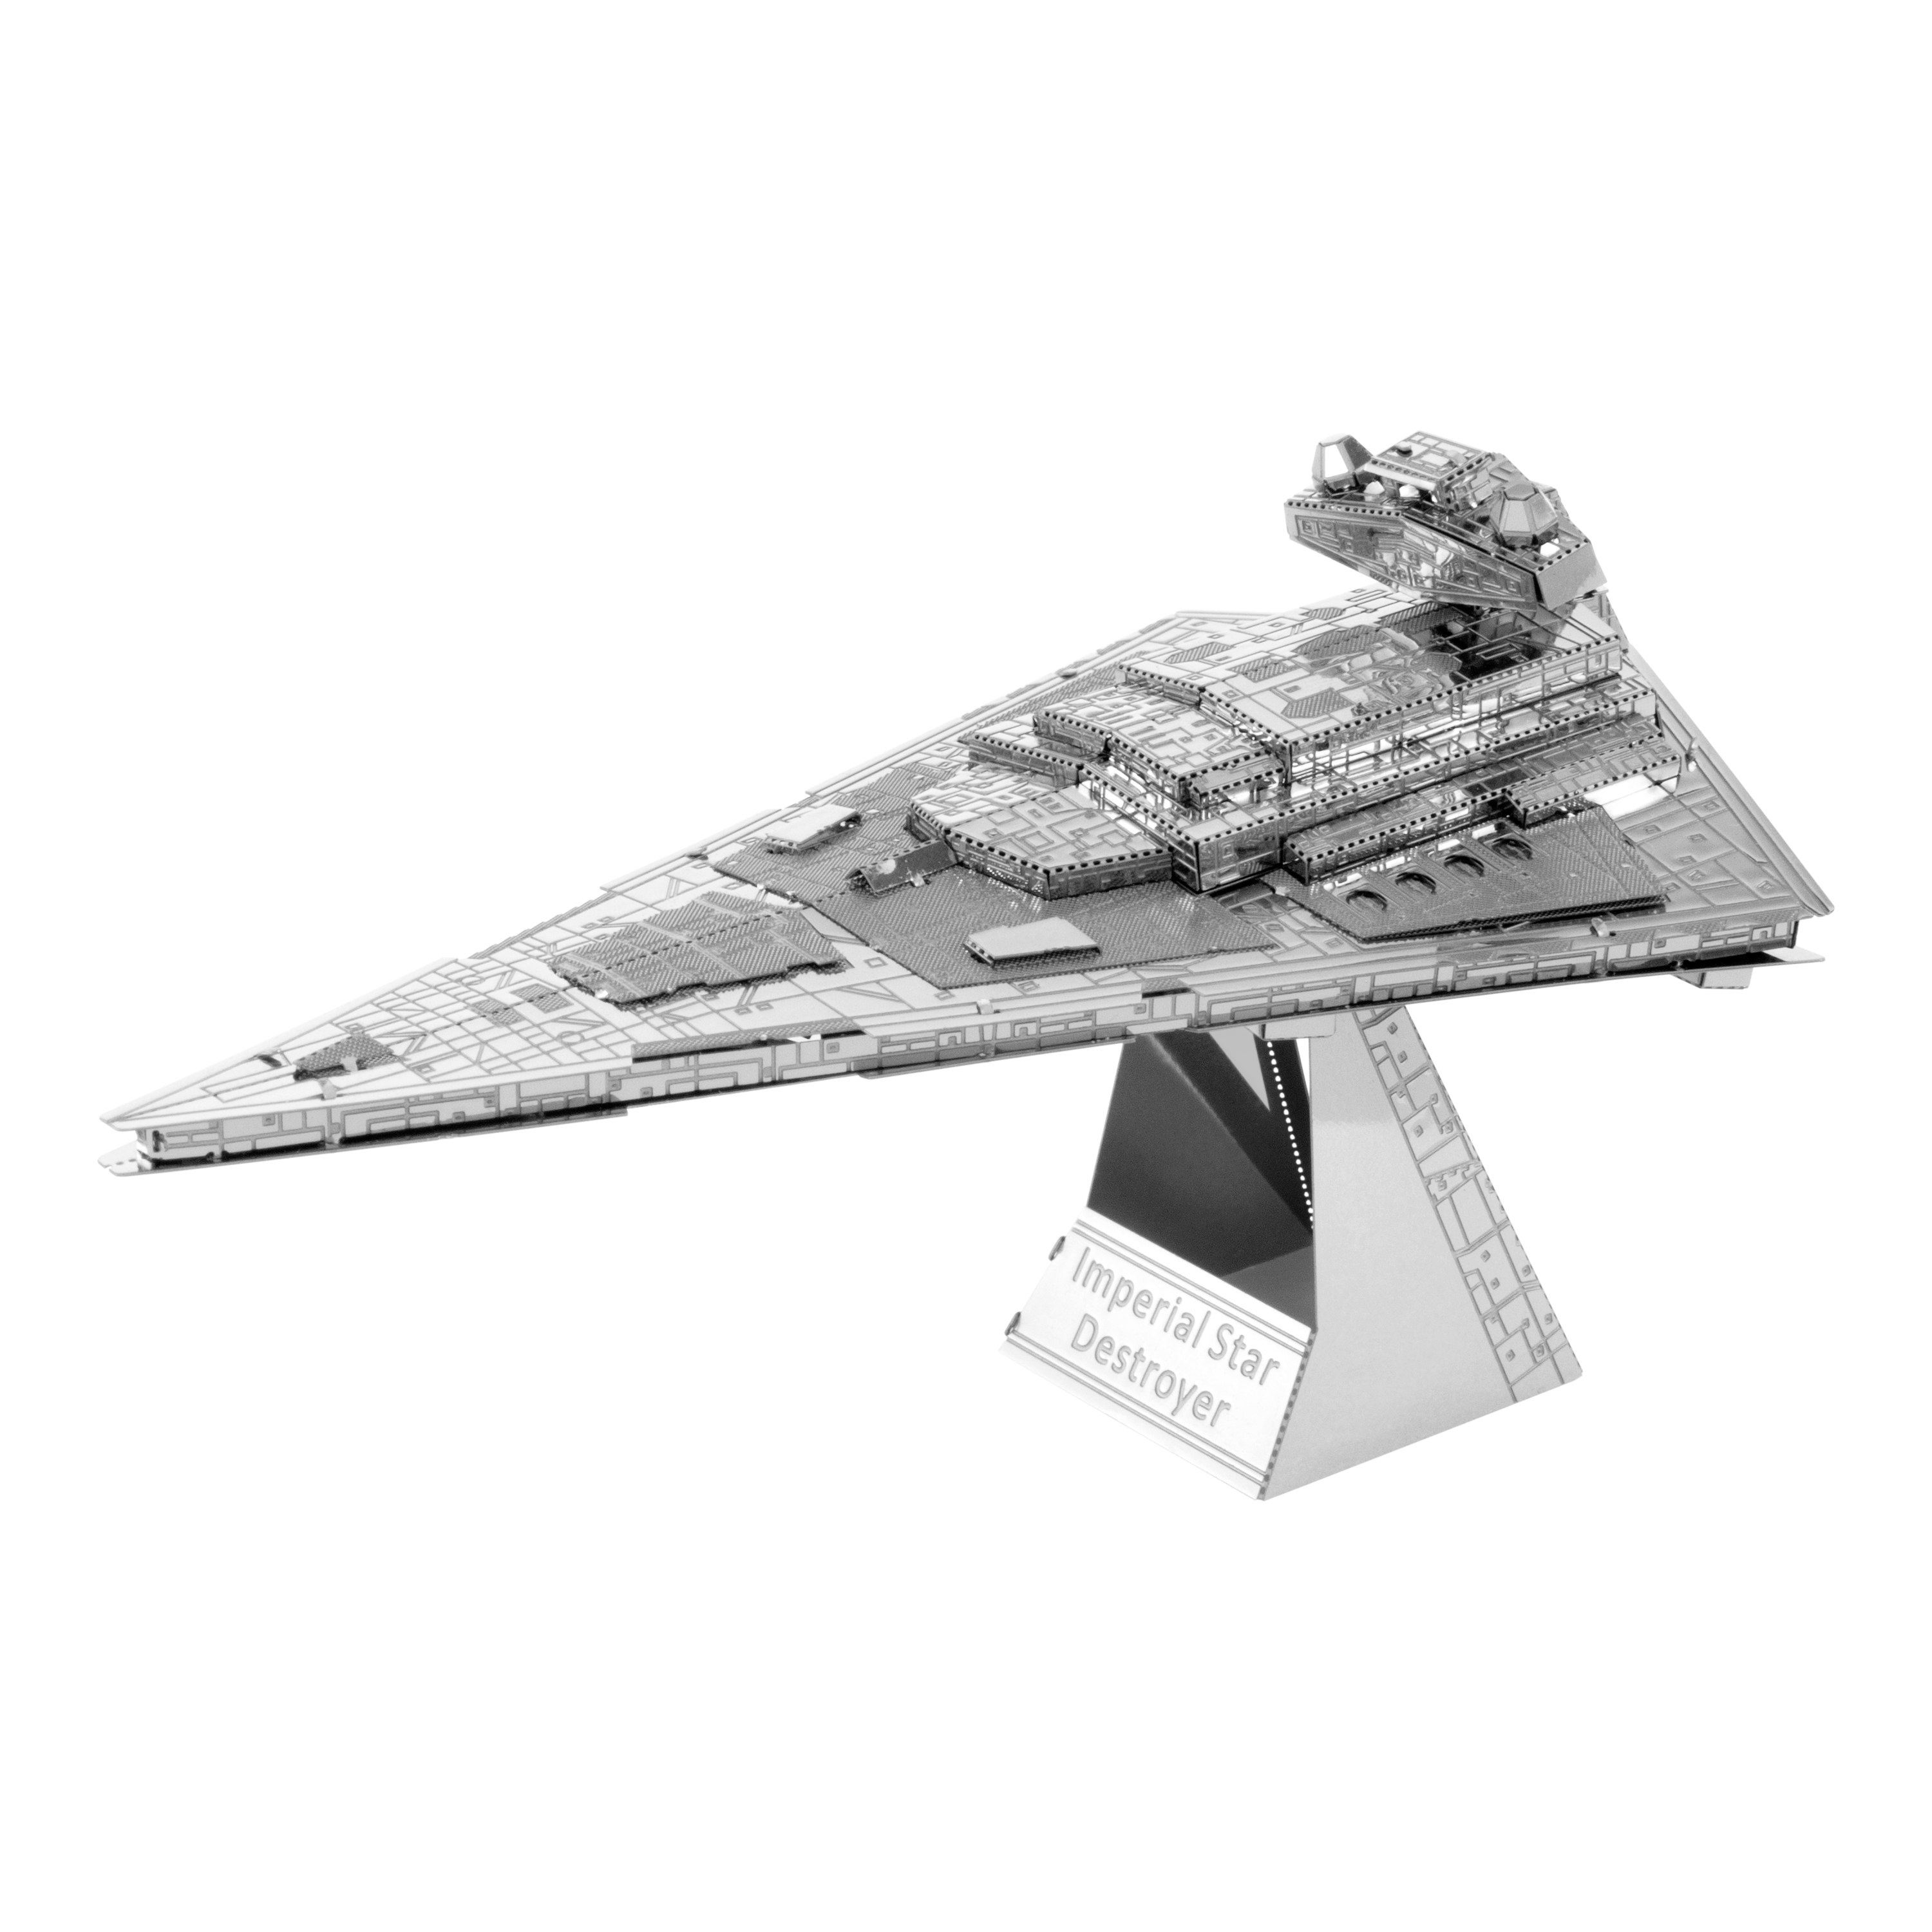 Fascinations Toys & Gifts Metal Earth 3D Laser Cut Model - Star Wars Imperial Star Destroyer